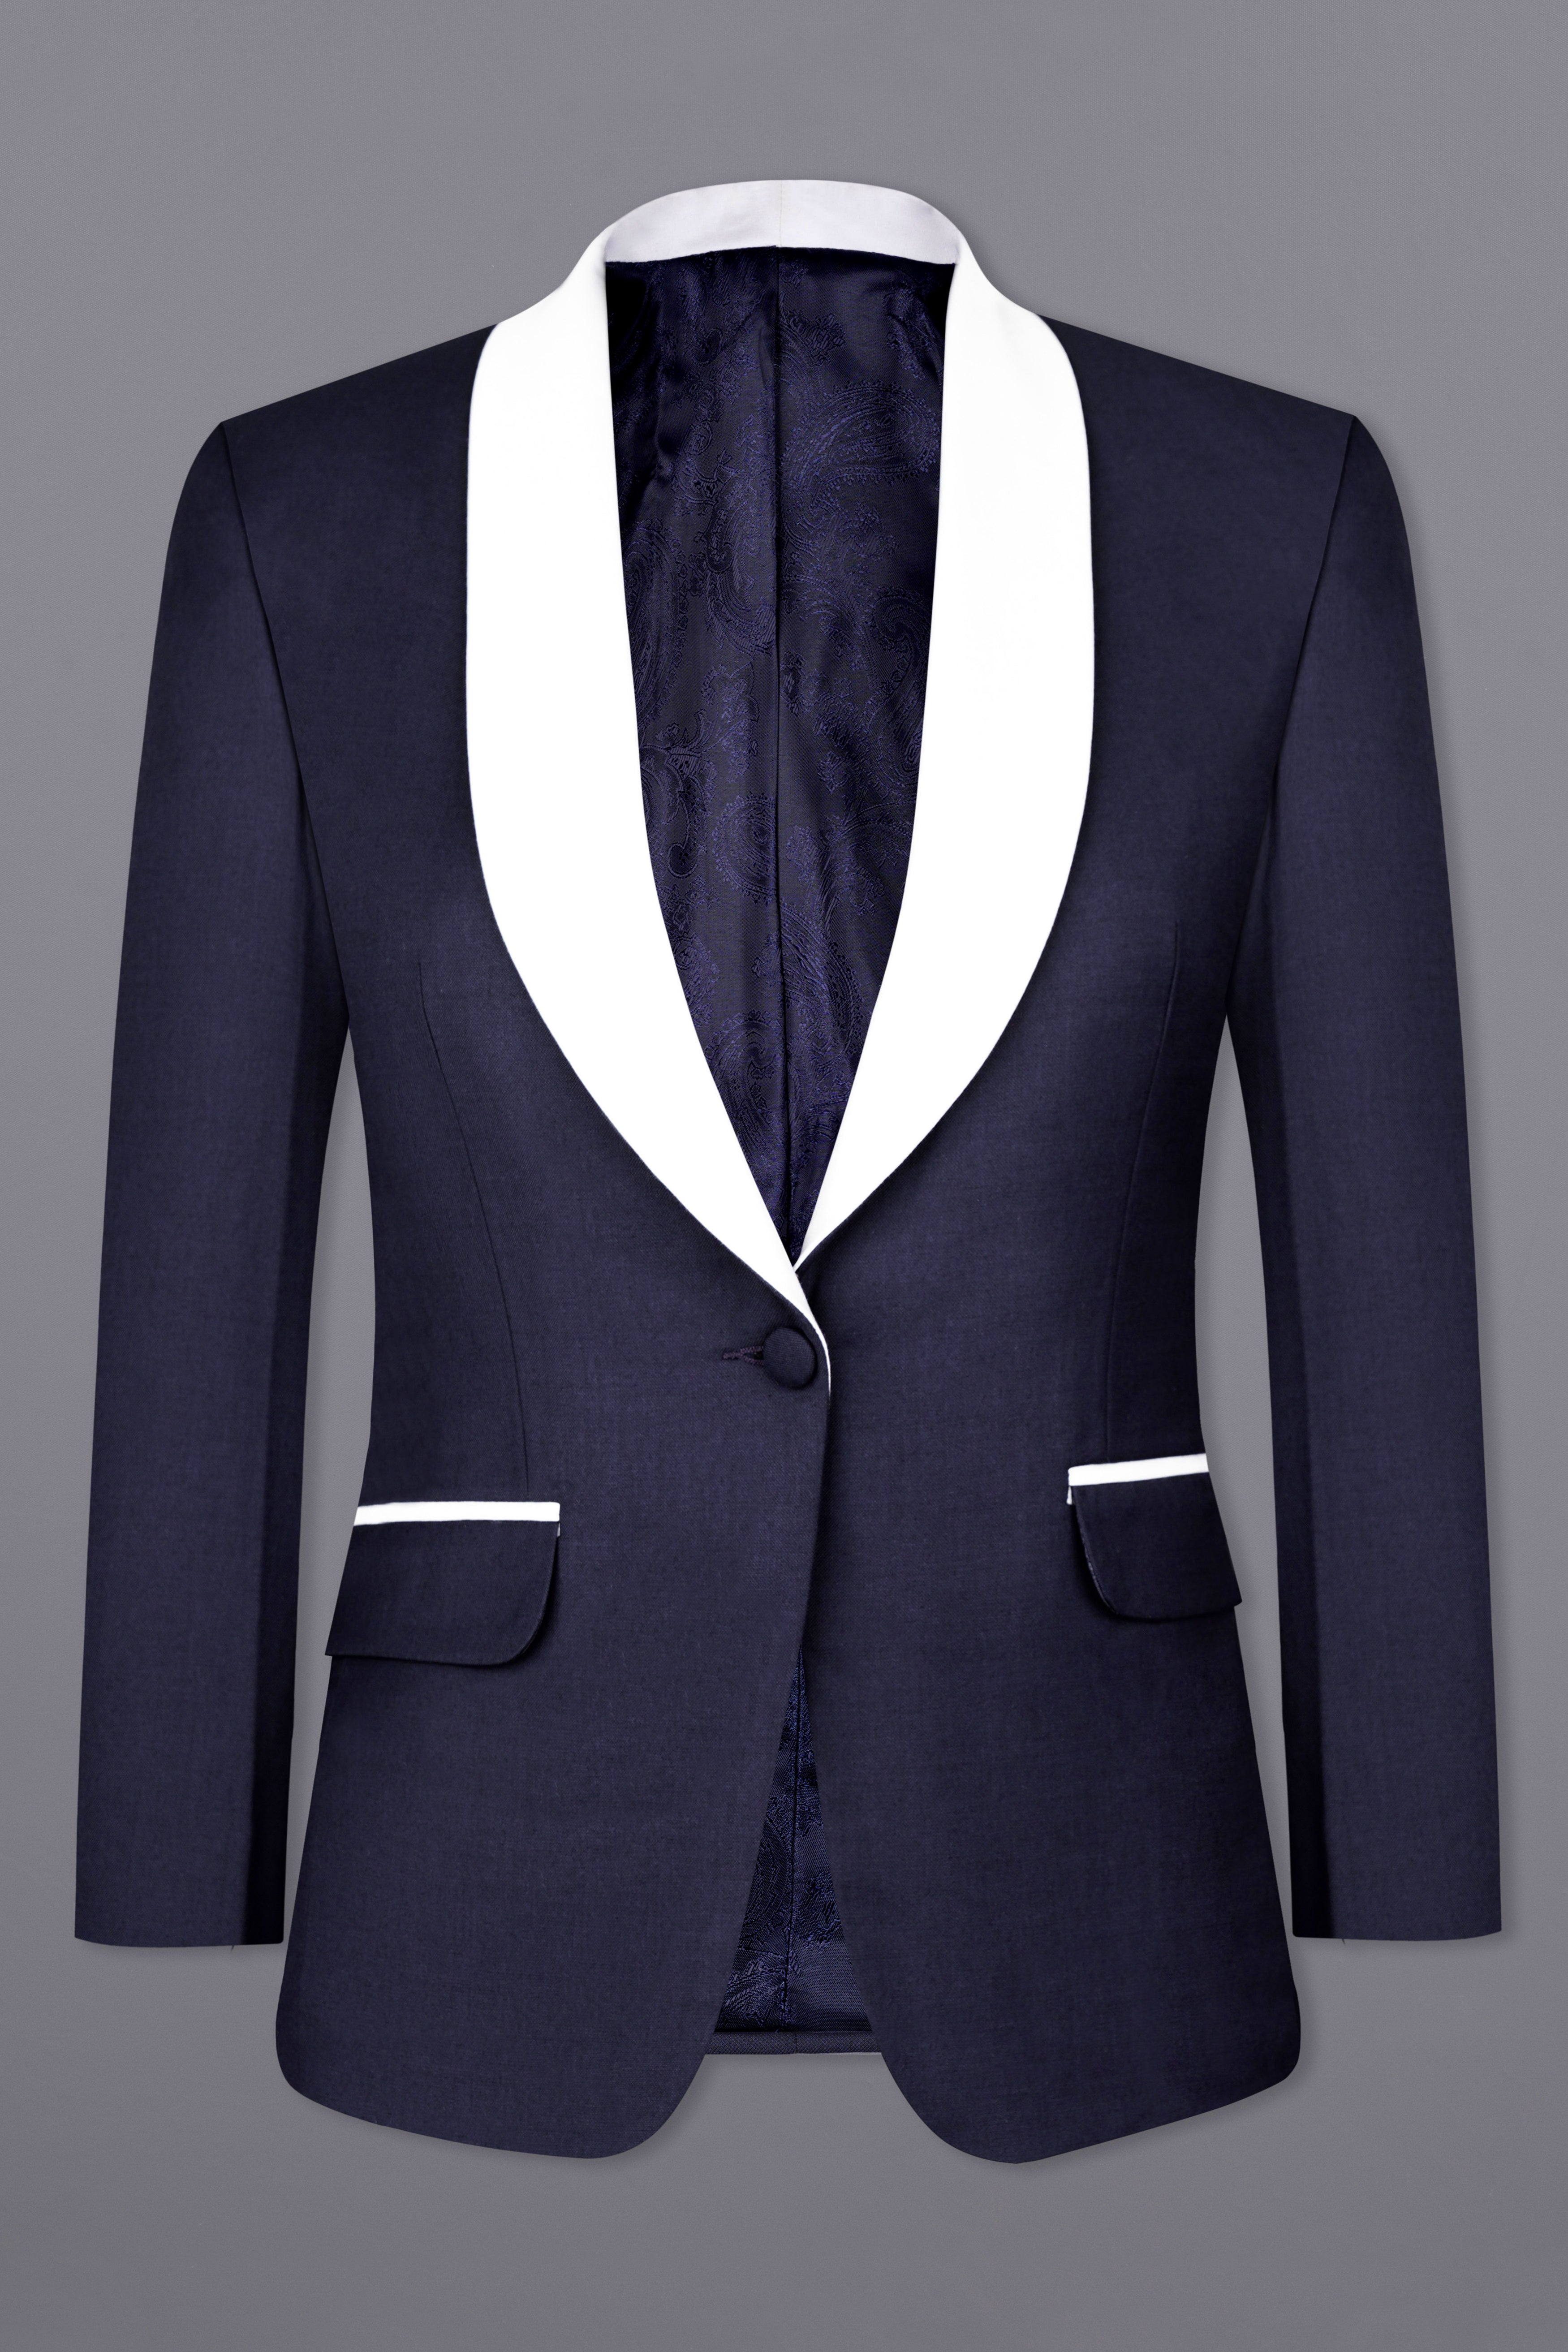 Charade Navy Blue Subtle Sheen with White Lapel Single Breasted Women's Blazer